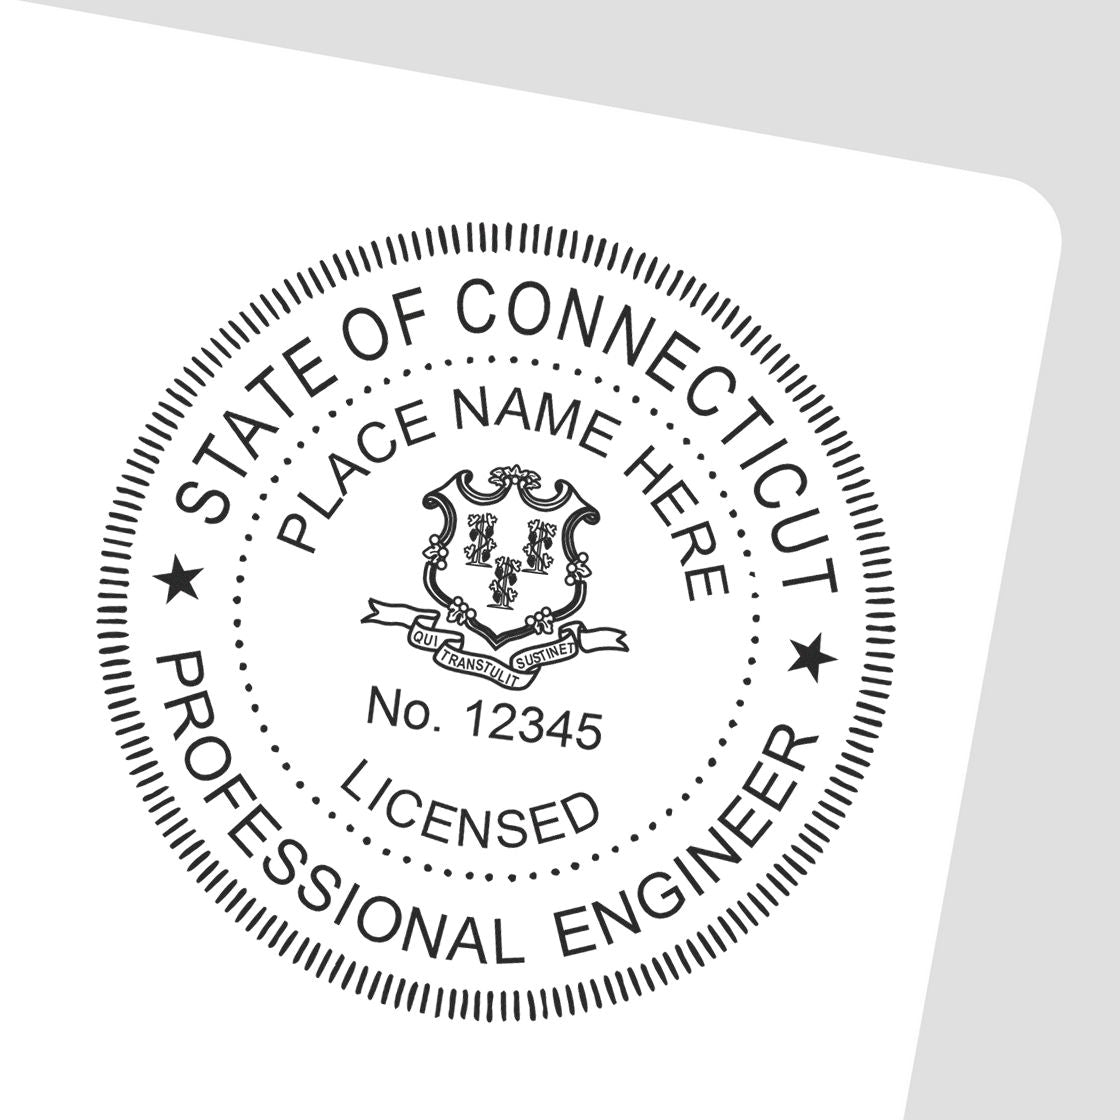 A stamped impression of the Slim Pre-Inked Connecticut Professional Engineer Seal Stamp in this stylish lifestyle photo, setting the tone for a unique and personalized product.